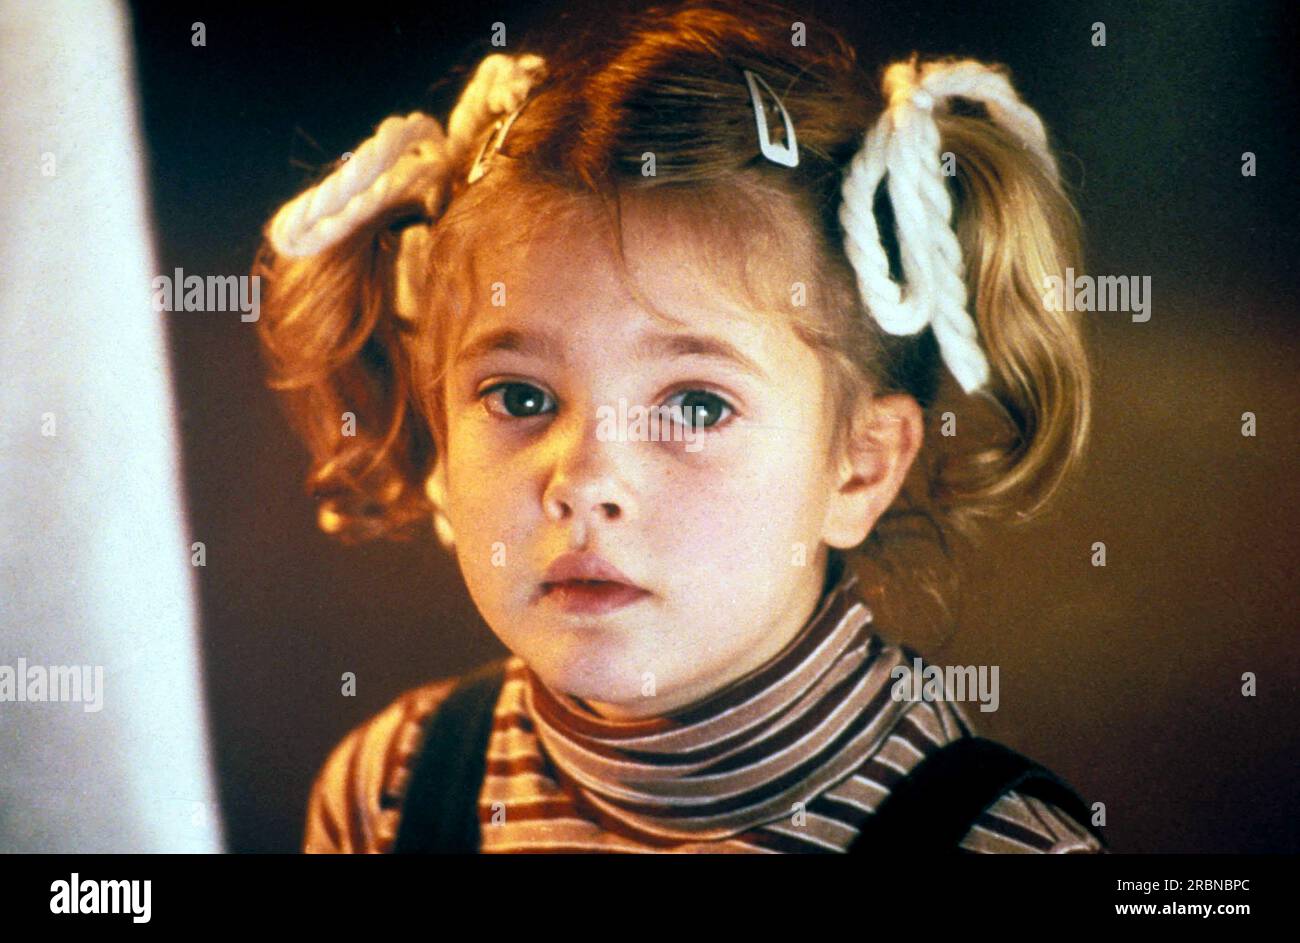 Drew Barrymore  E.T. The Extra-Terrestrial Stock Photo